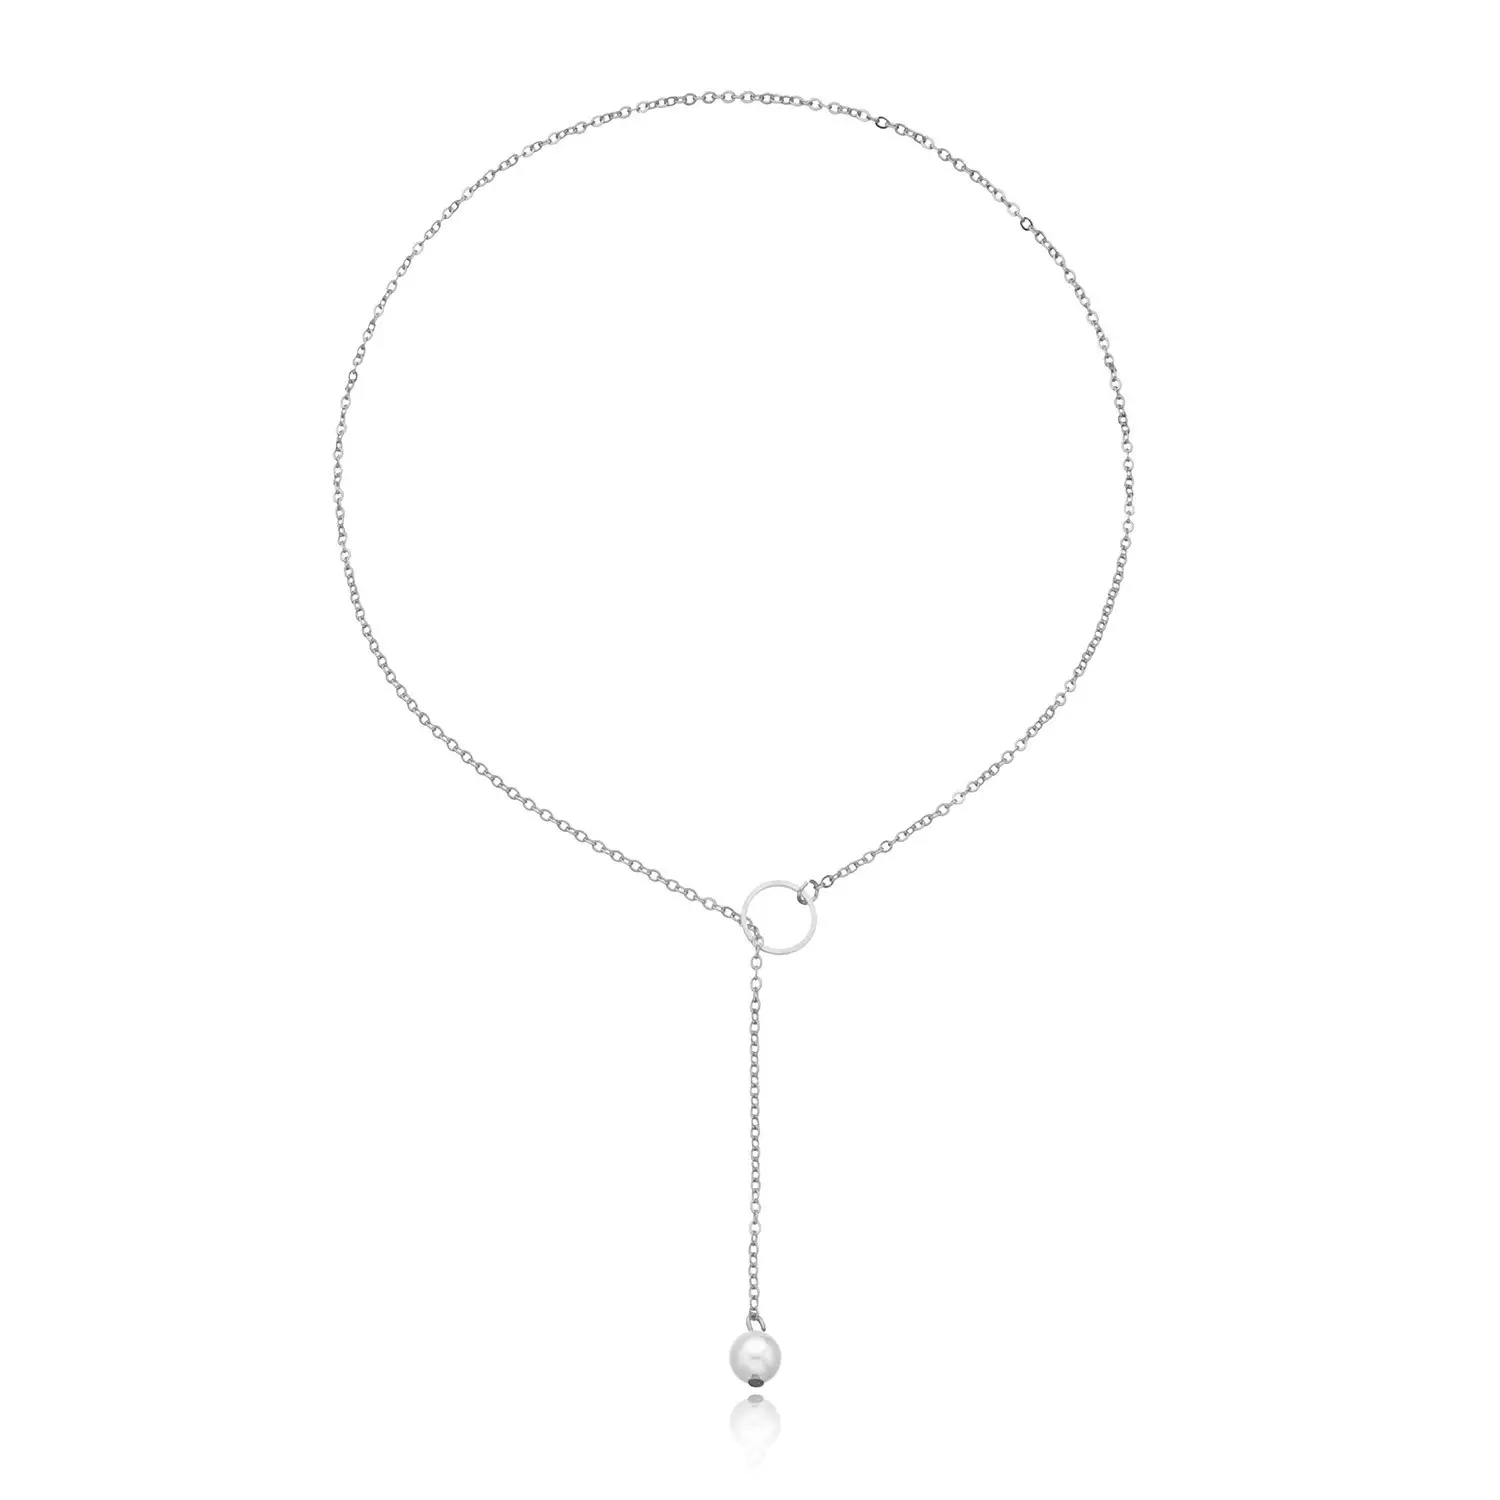 Chancy New Design Wholesale Fashion Simple Plain Gold Silver Alloy Long Link Chain Circle Necklace Jewelry Women